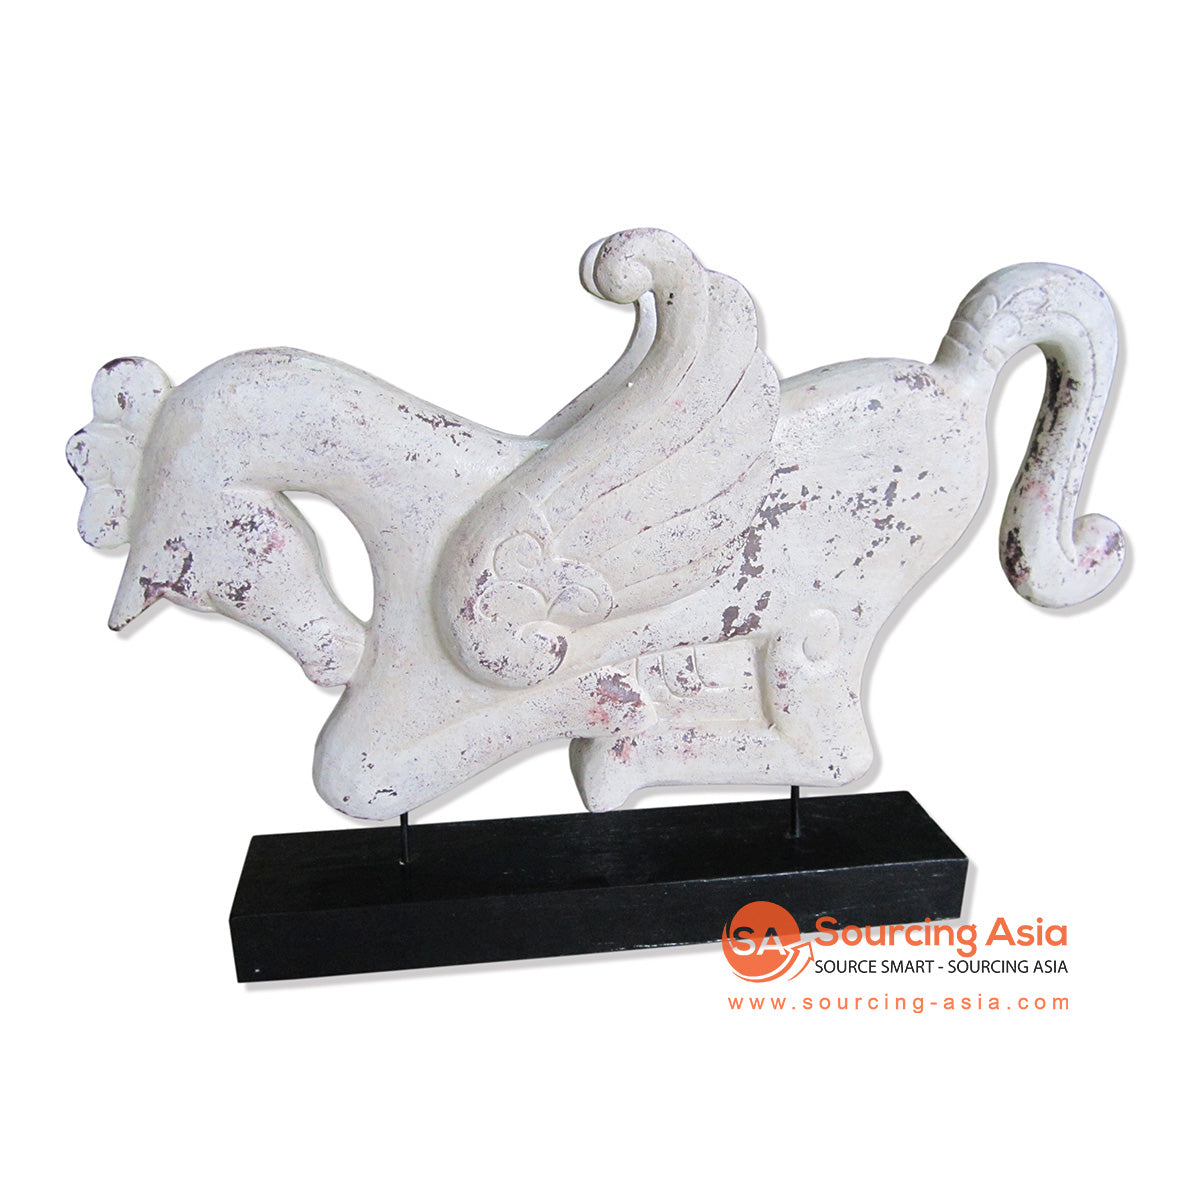 ISUL155-AW ANTIQUE WHITE FLYING HORSE ON STAND DECORATION